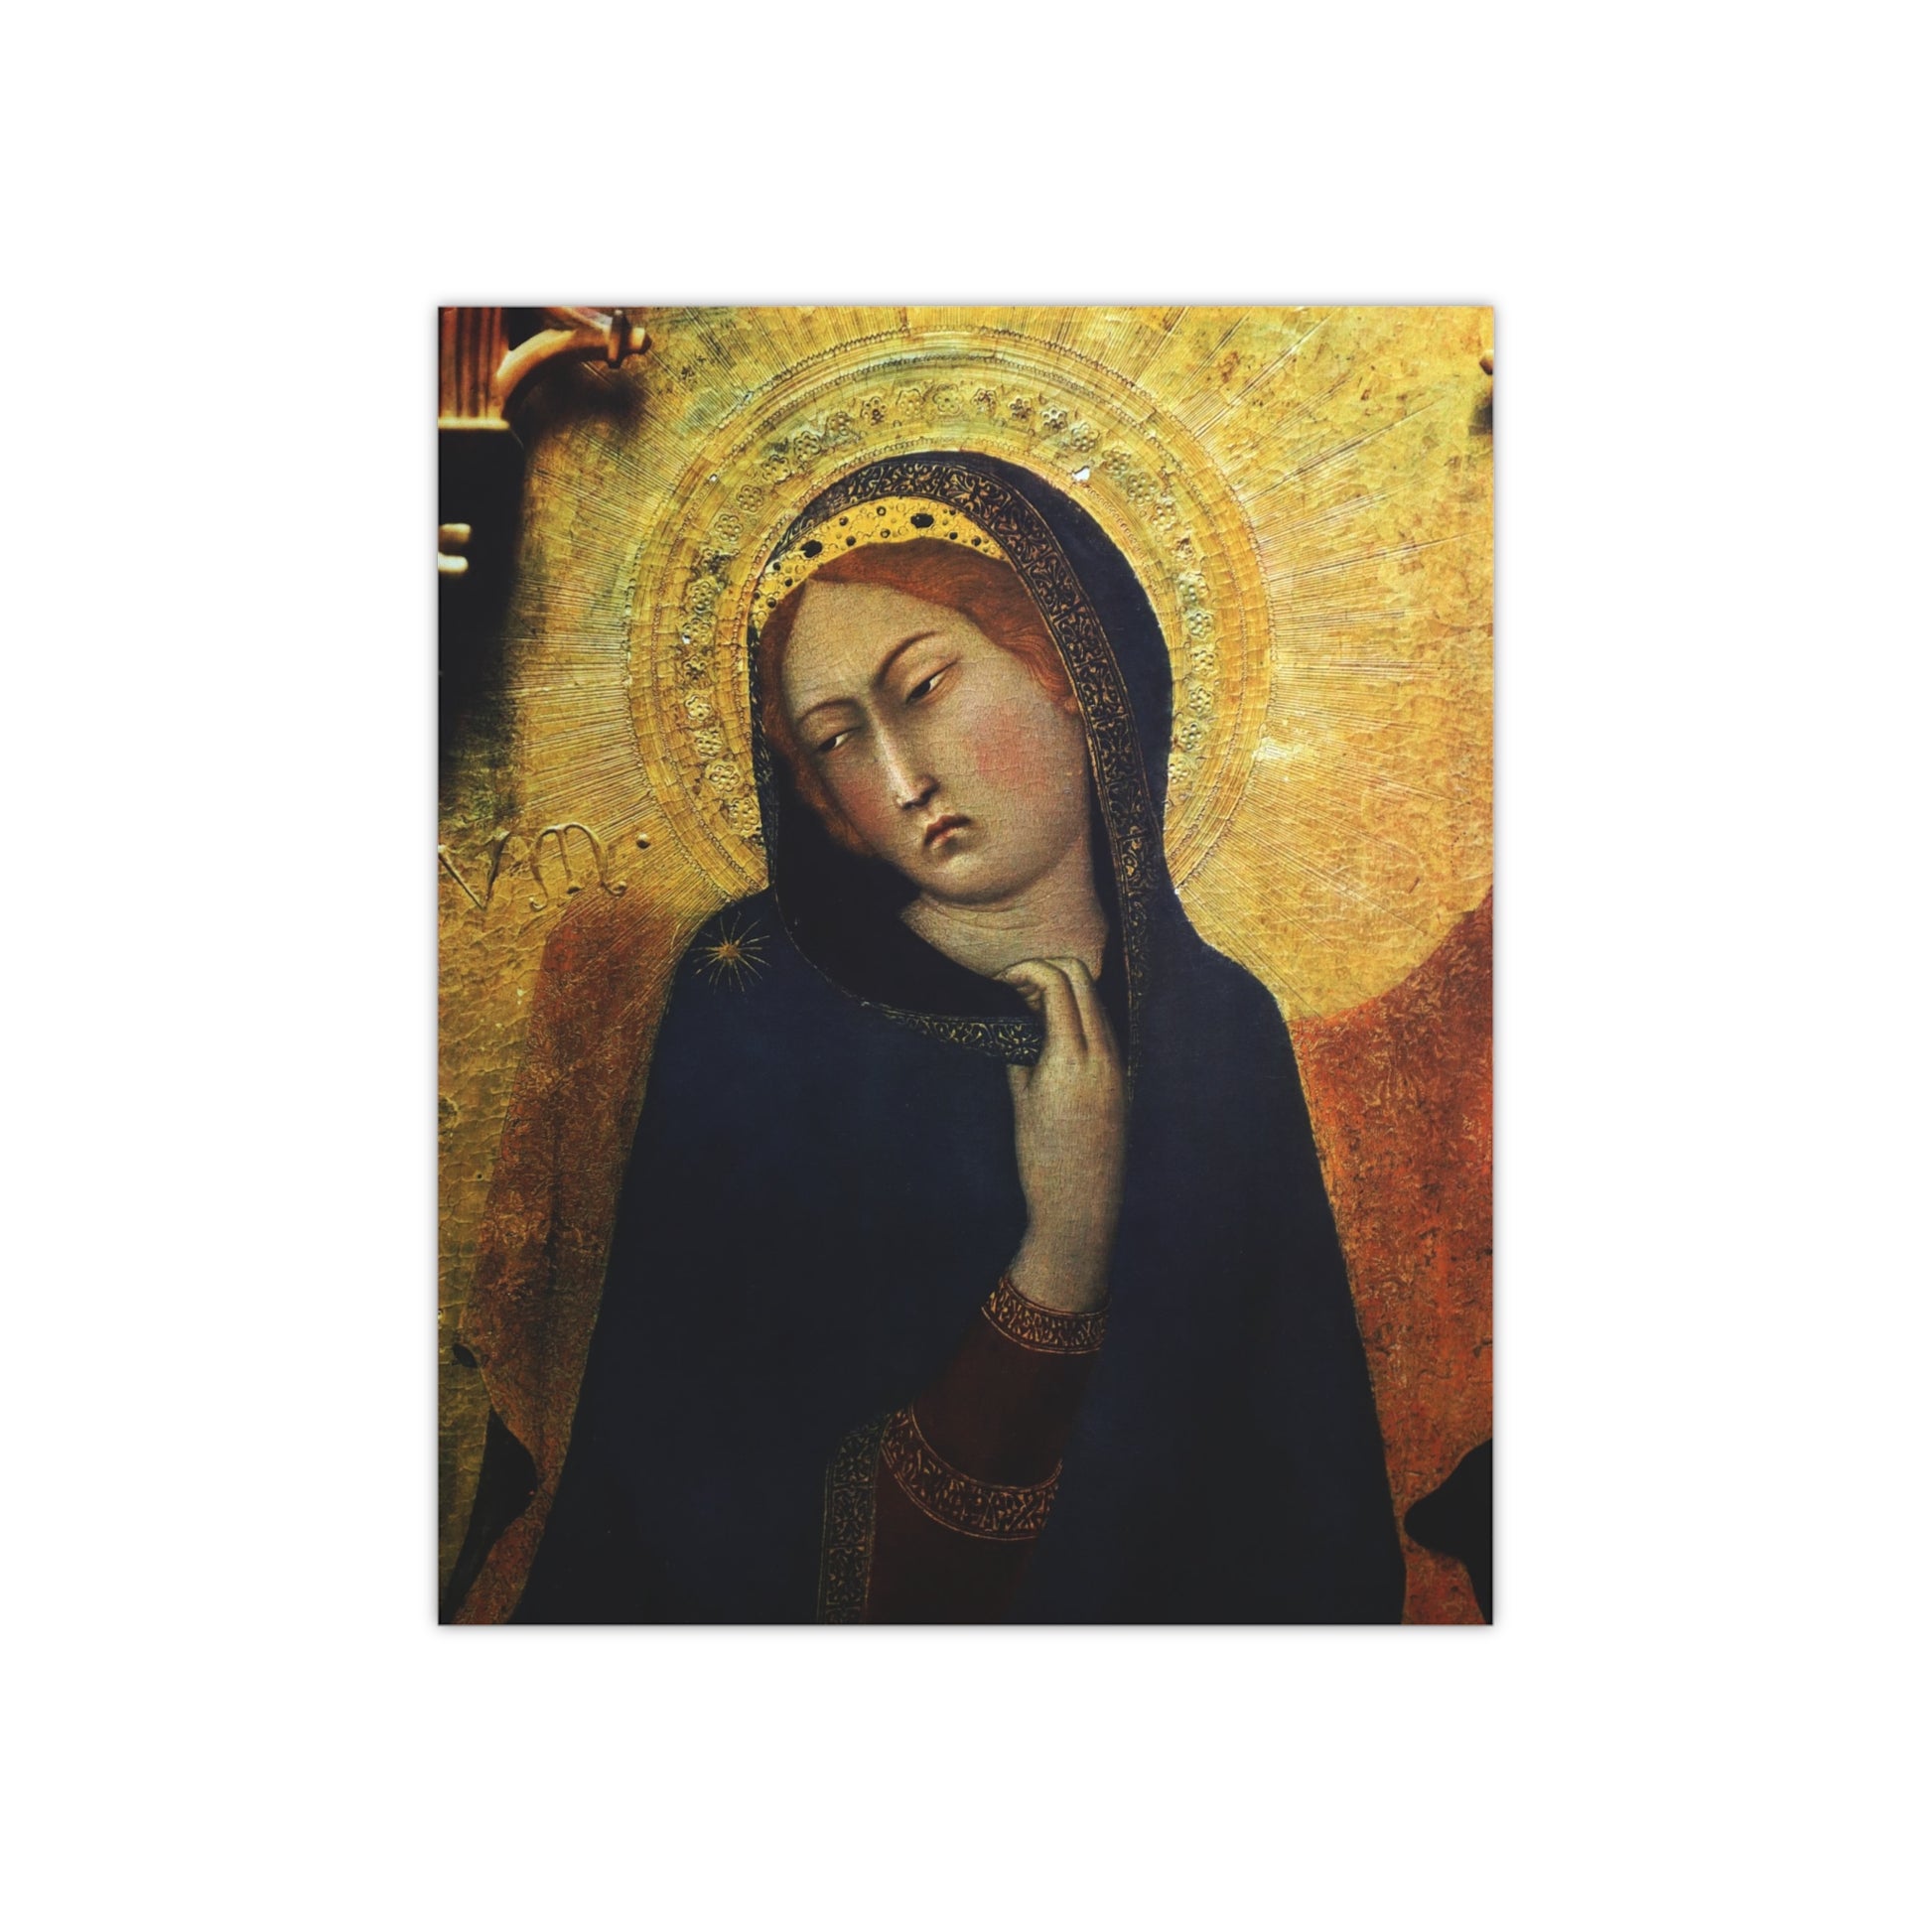 Annunciation of the Virgin Mary - Unframed Print (300gsm) - Sanctus Art Gallery